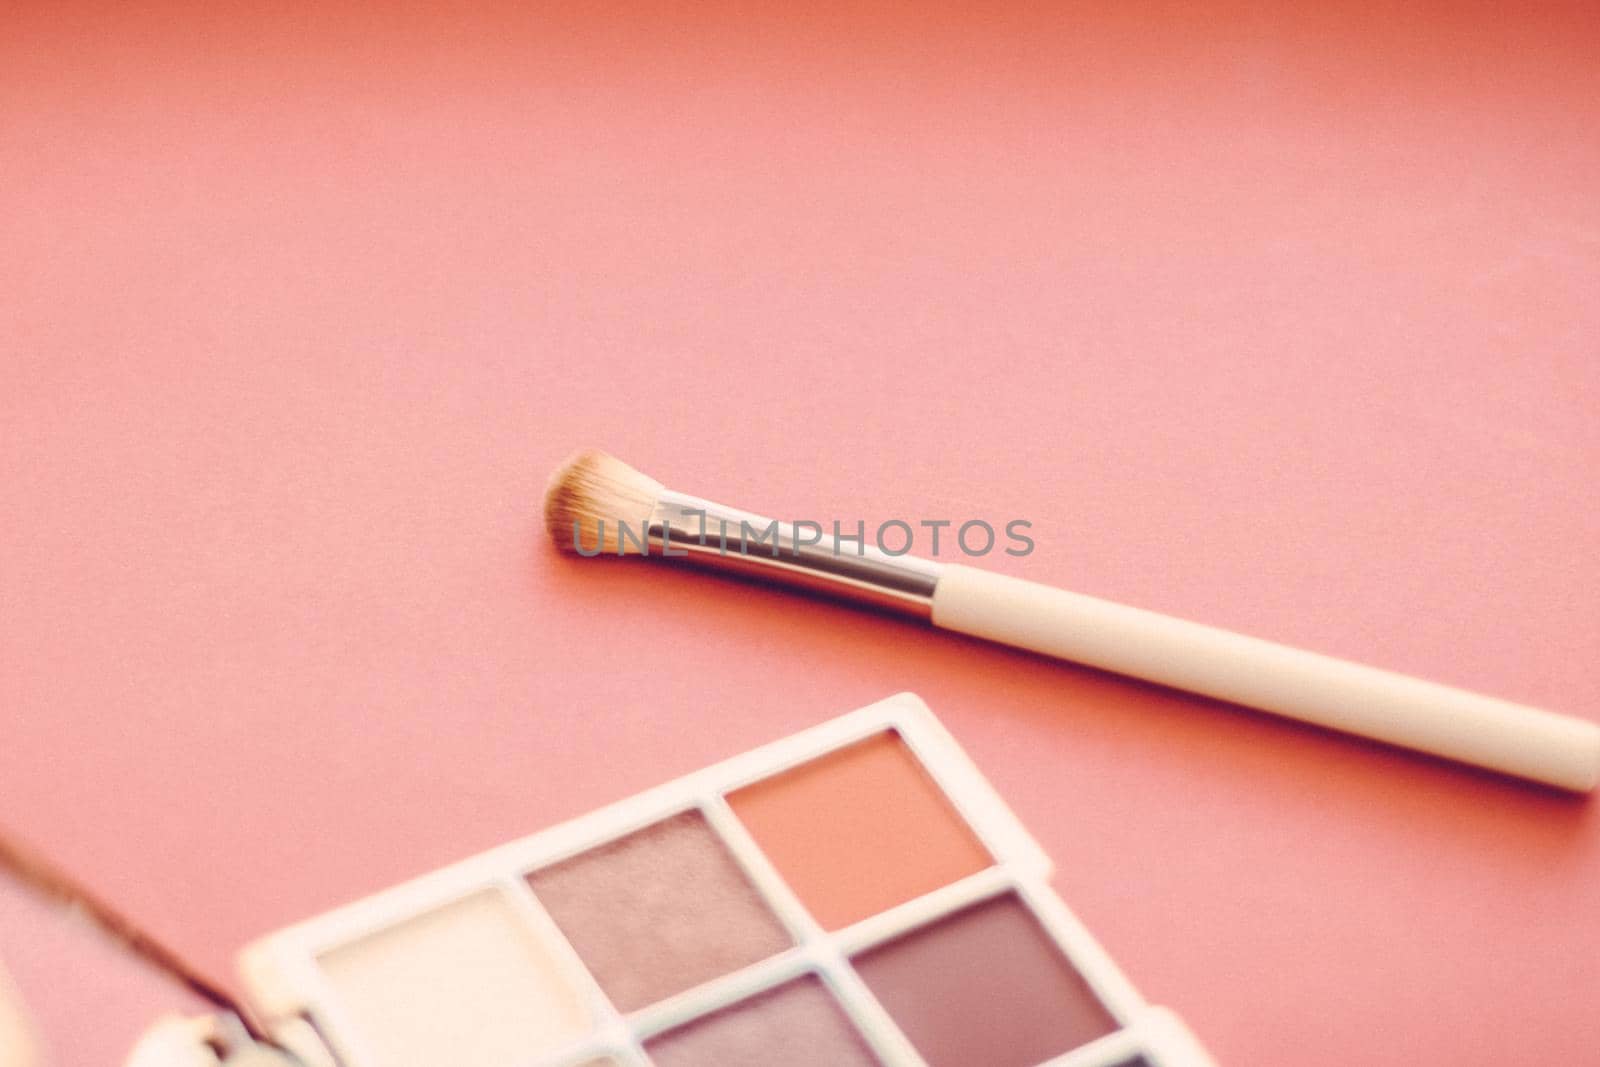 Eyeshadow palette and make-up brush on orange background, eye shadows cosmetics product as luxury beauty brand promotion and holiday fashion blog design by Anneleven